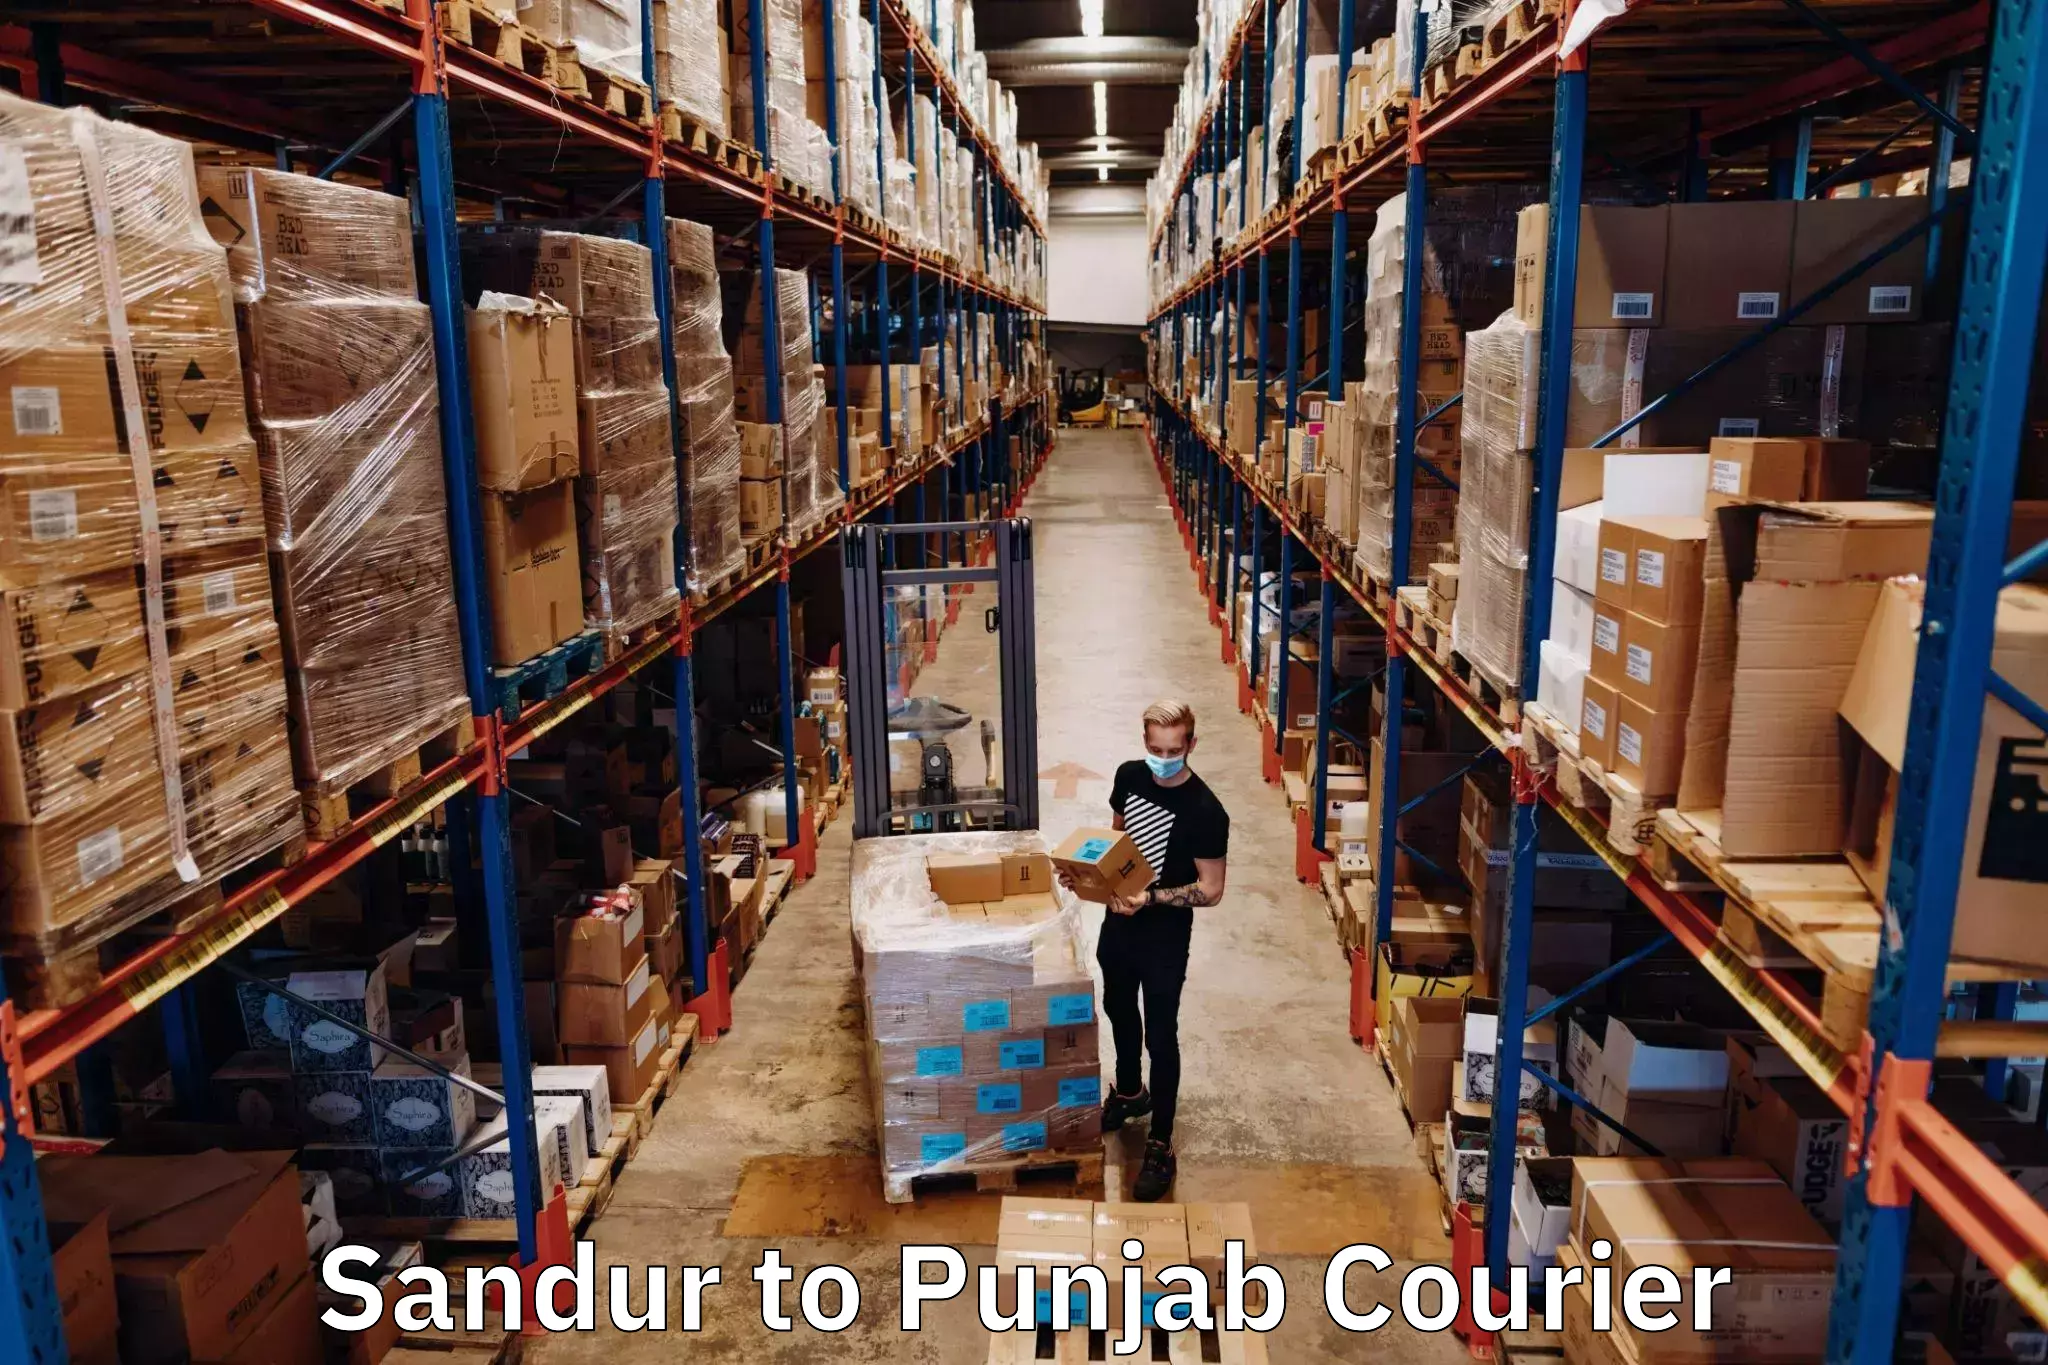 Next-day delivery options Sandur to Zirakpur